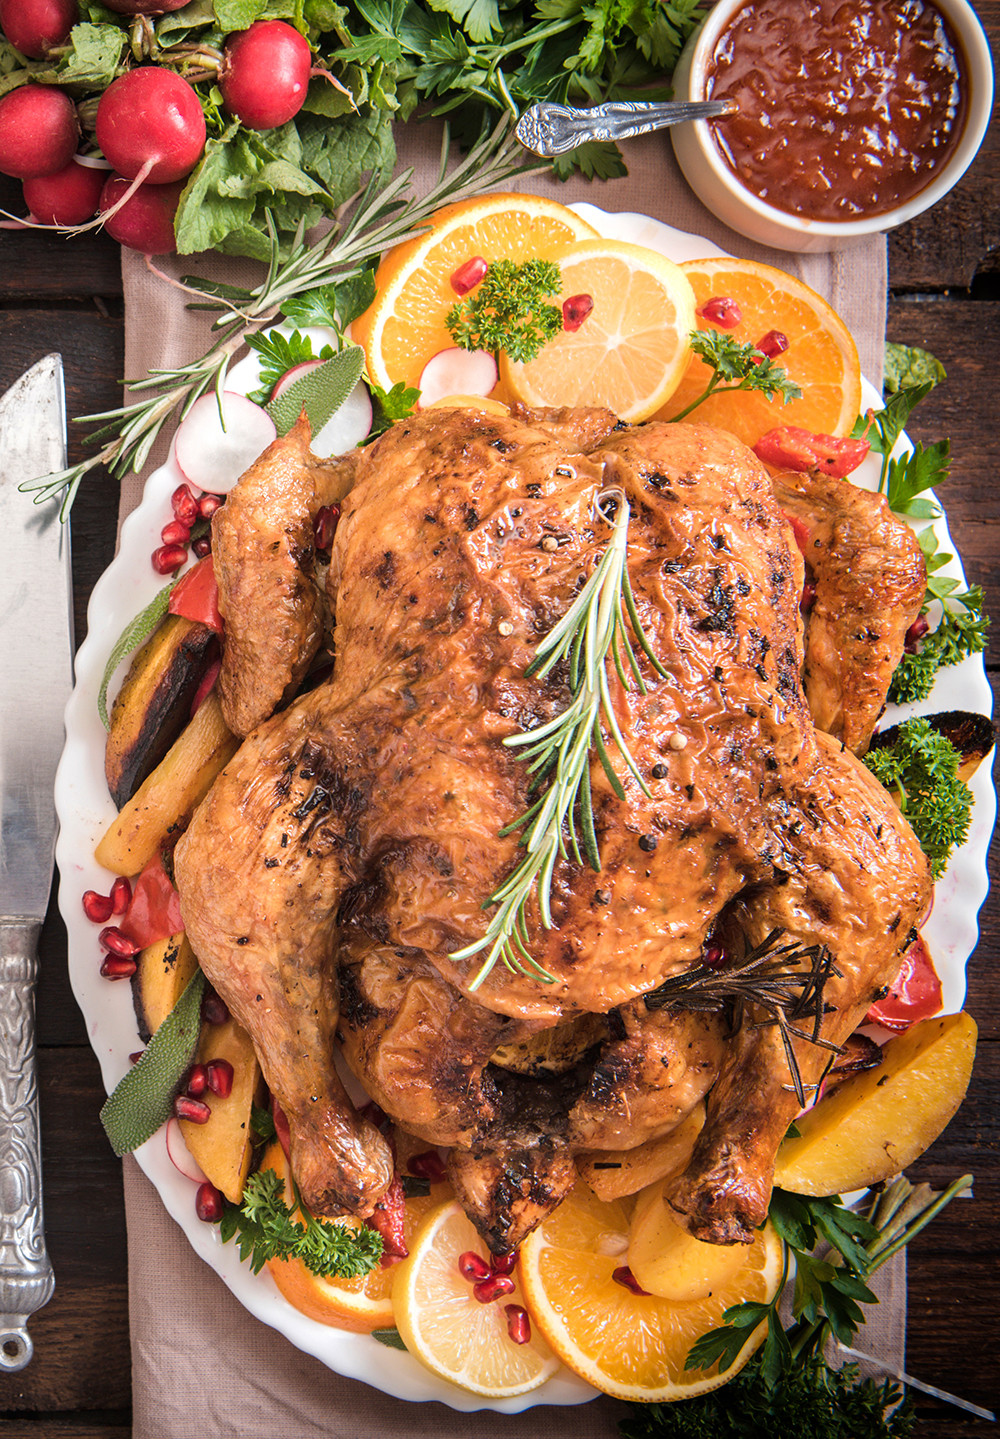 Thanksgiving Dinner Ideas Without Turkey
 Full Turkey Dinner 12 – 16 People – Max to Go